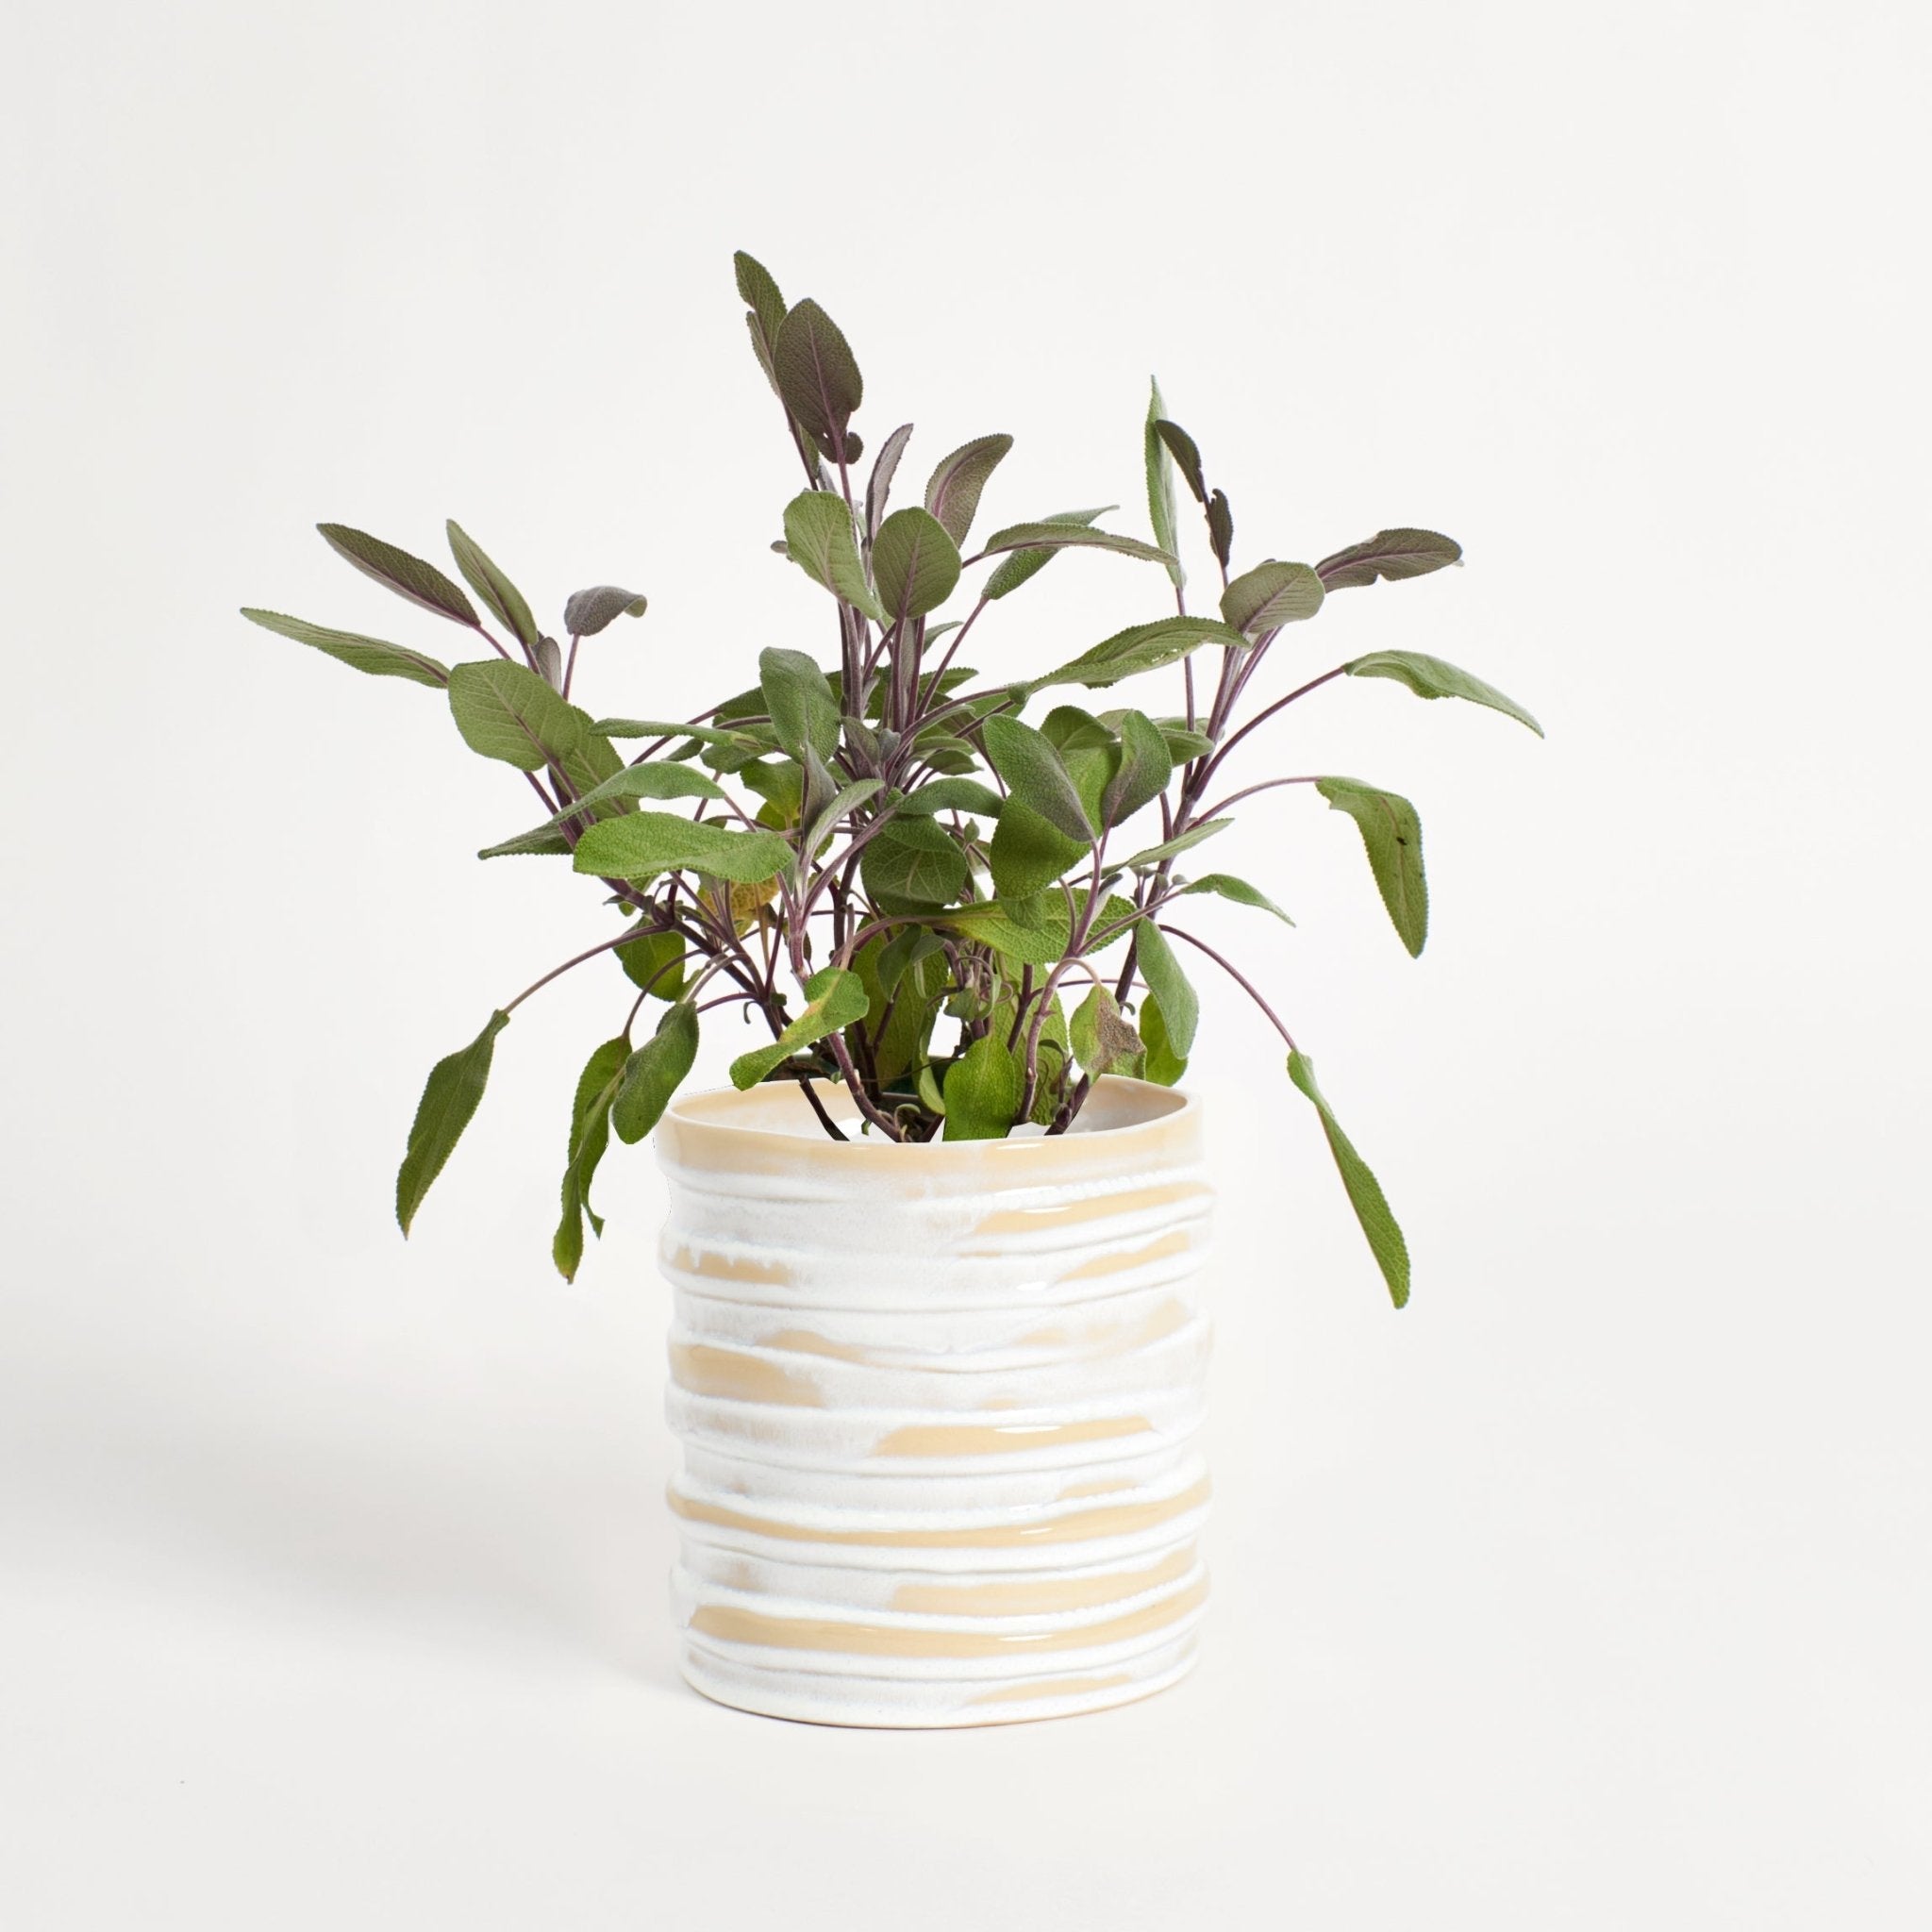 Alfonso pot - White flower pot by Project 213A